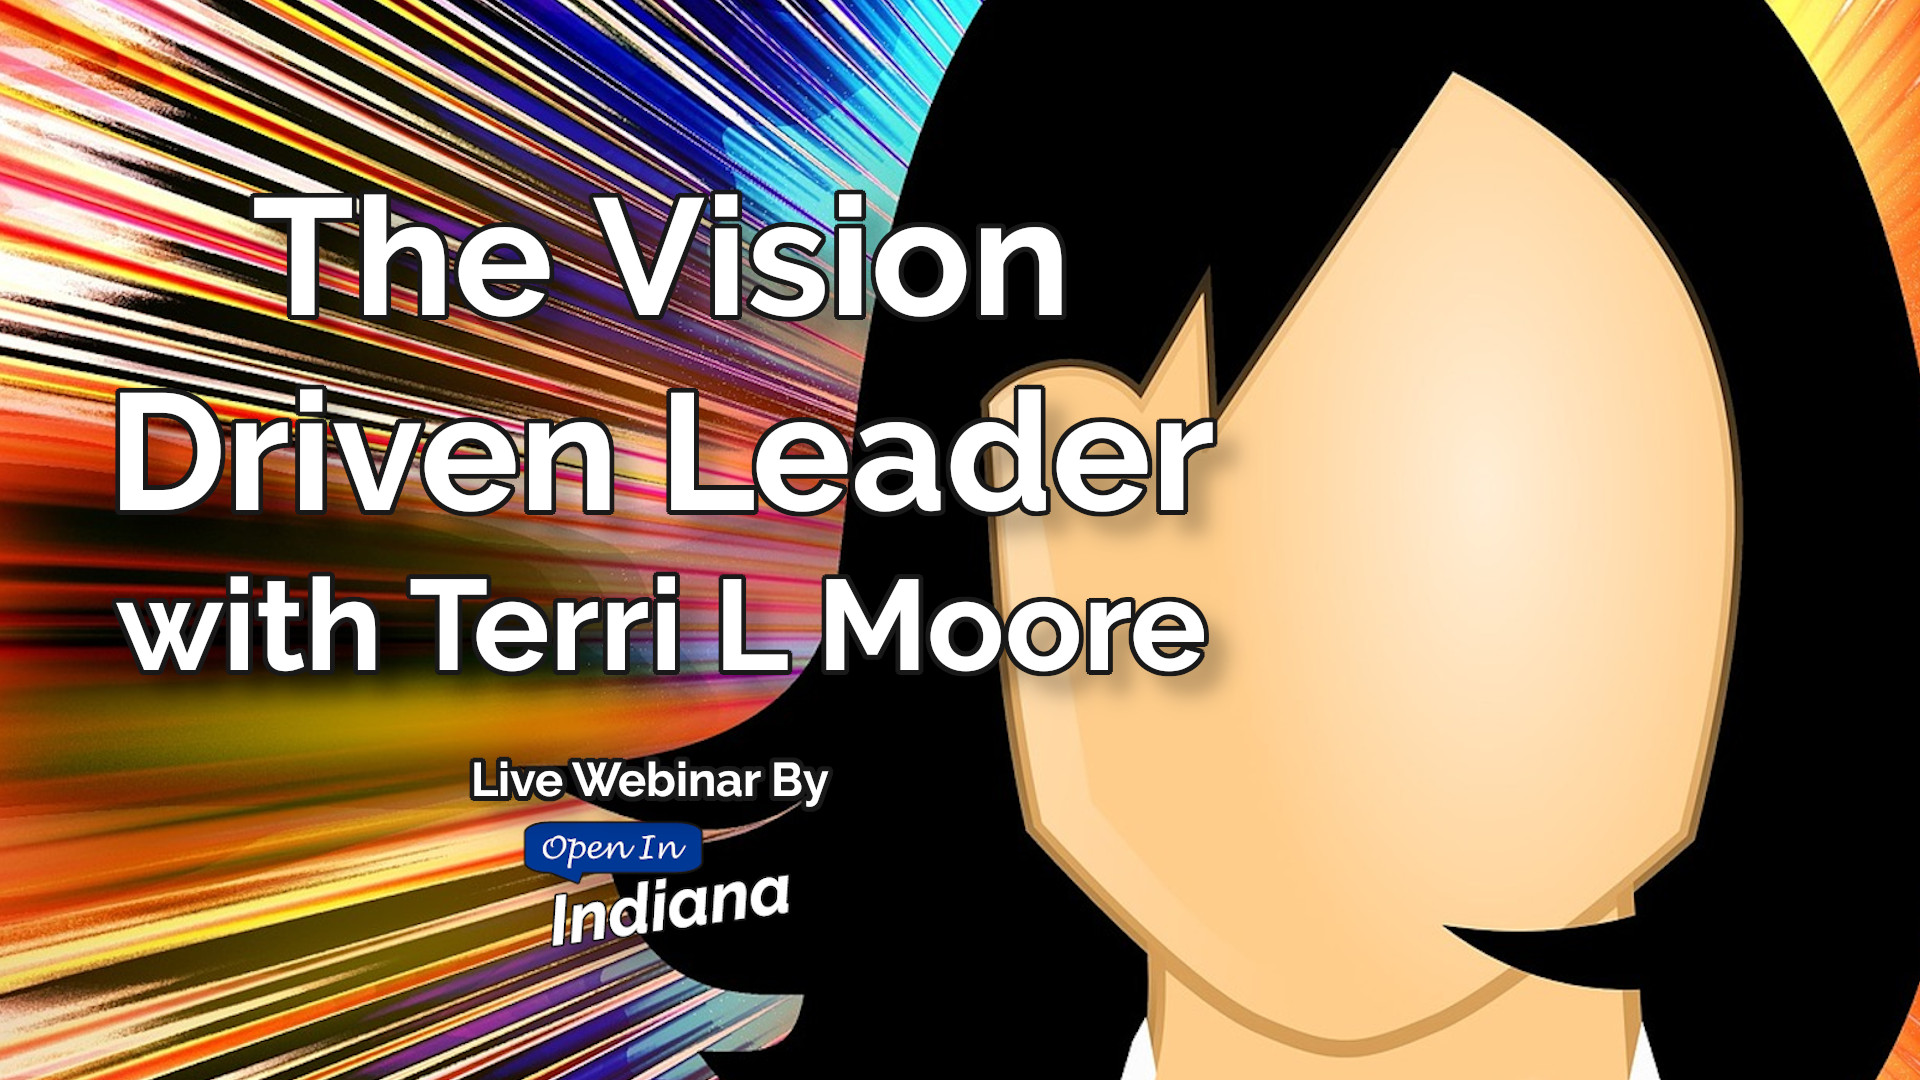 The Vision Driven Leader with Terri L Moore, Live Webinar by Open In Indiana/INSPIREsmall.biz, over a background image of a closeup of a faceless woman, with a multicolored, very active background zooming around her.